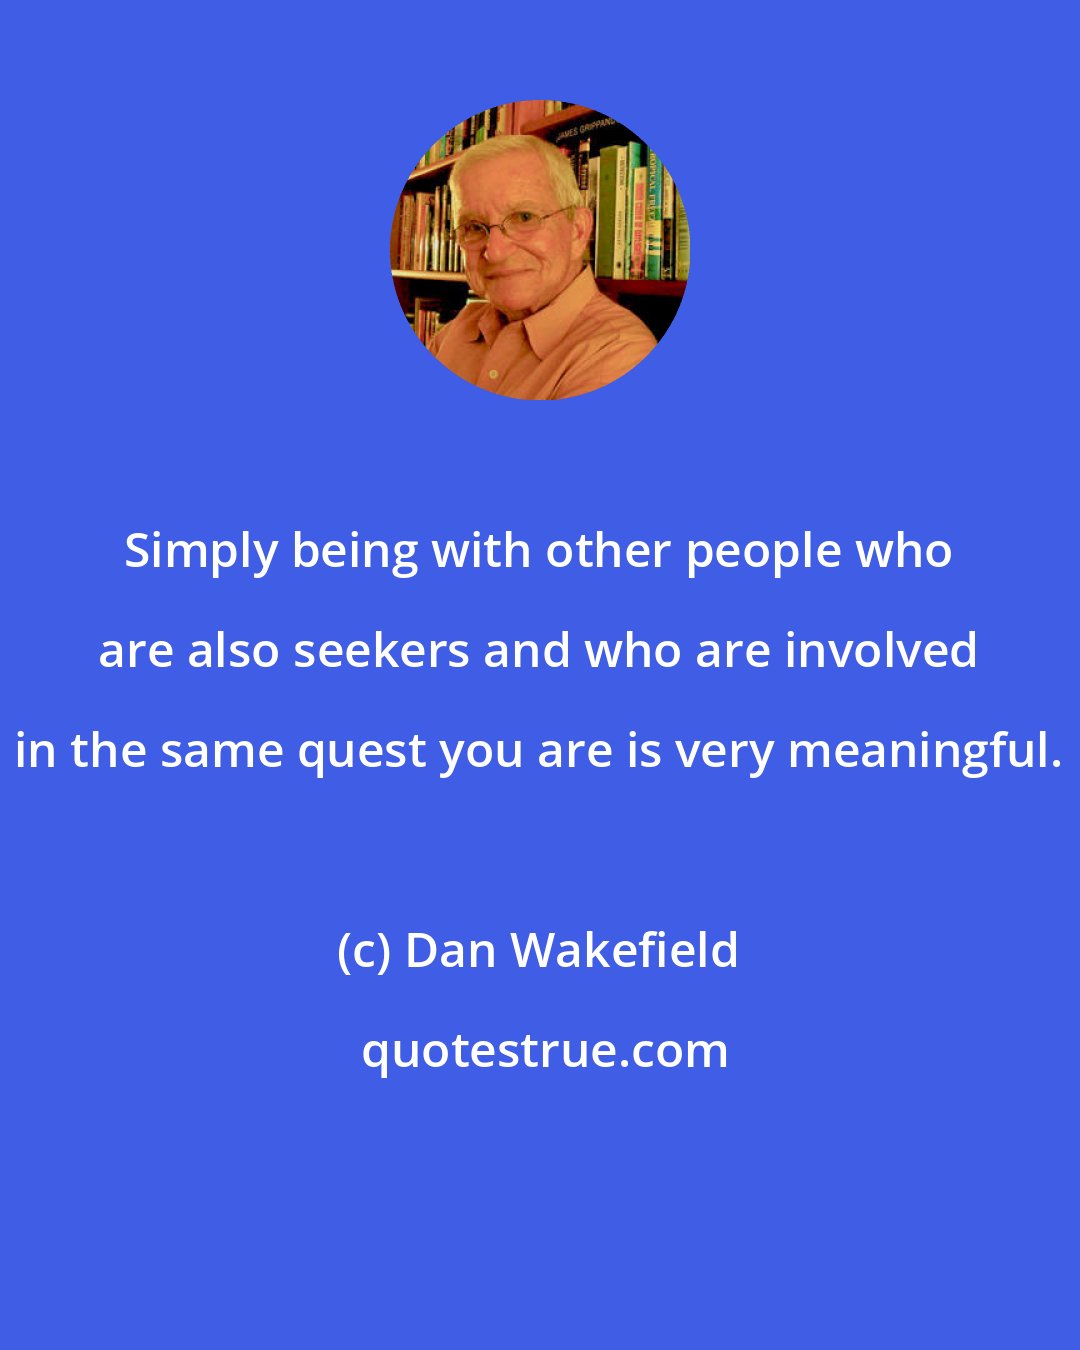 Dan Wakefield: Simply being with other people who are also seekers and who are involved in the same quest you are is very meaningful.